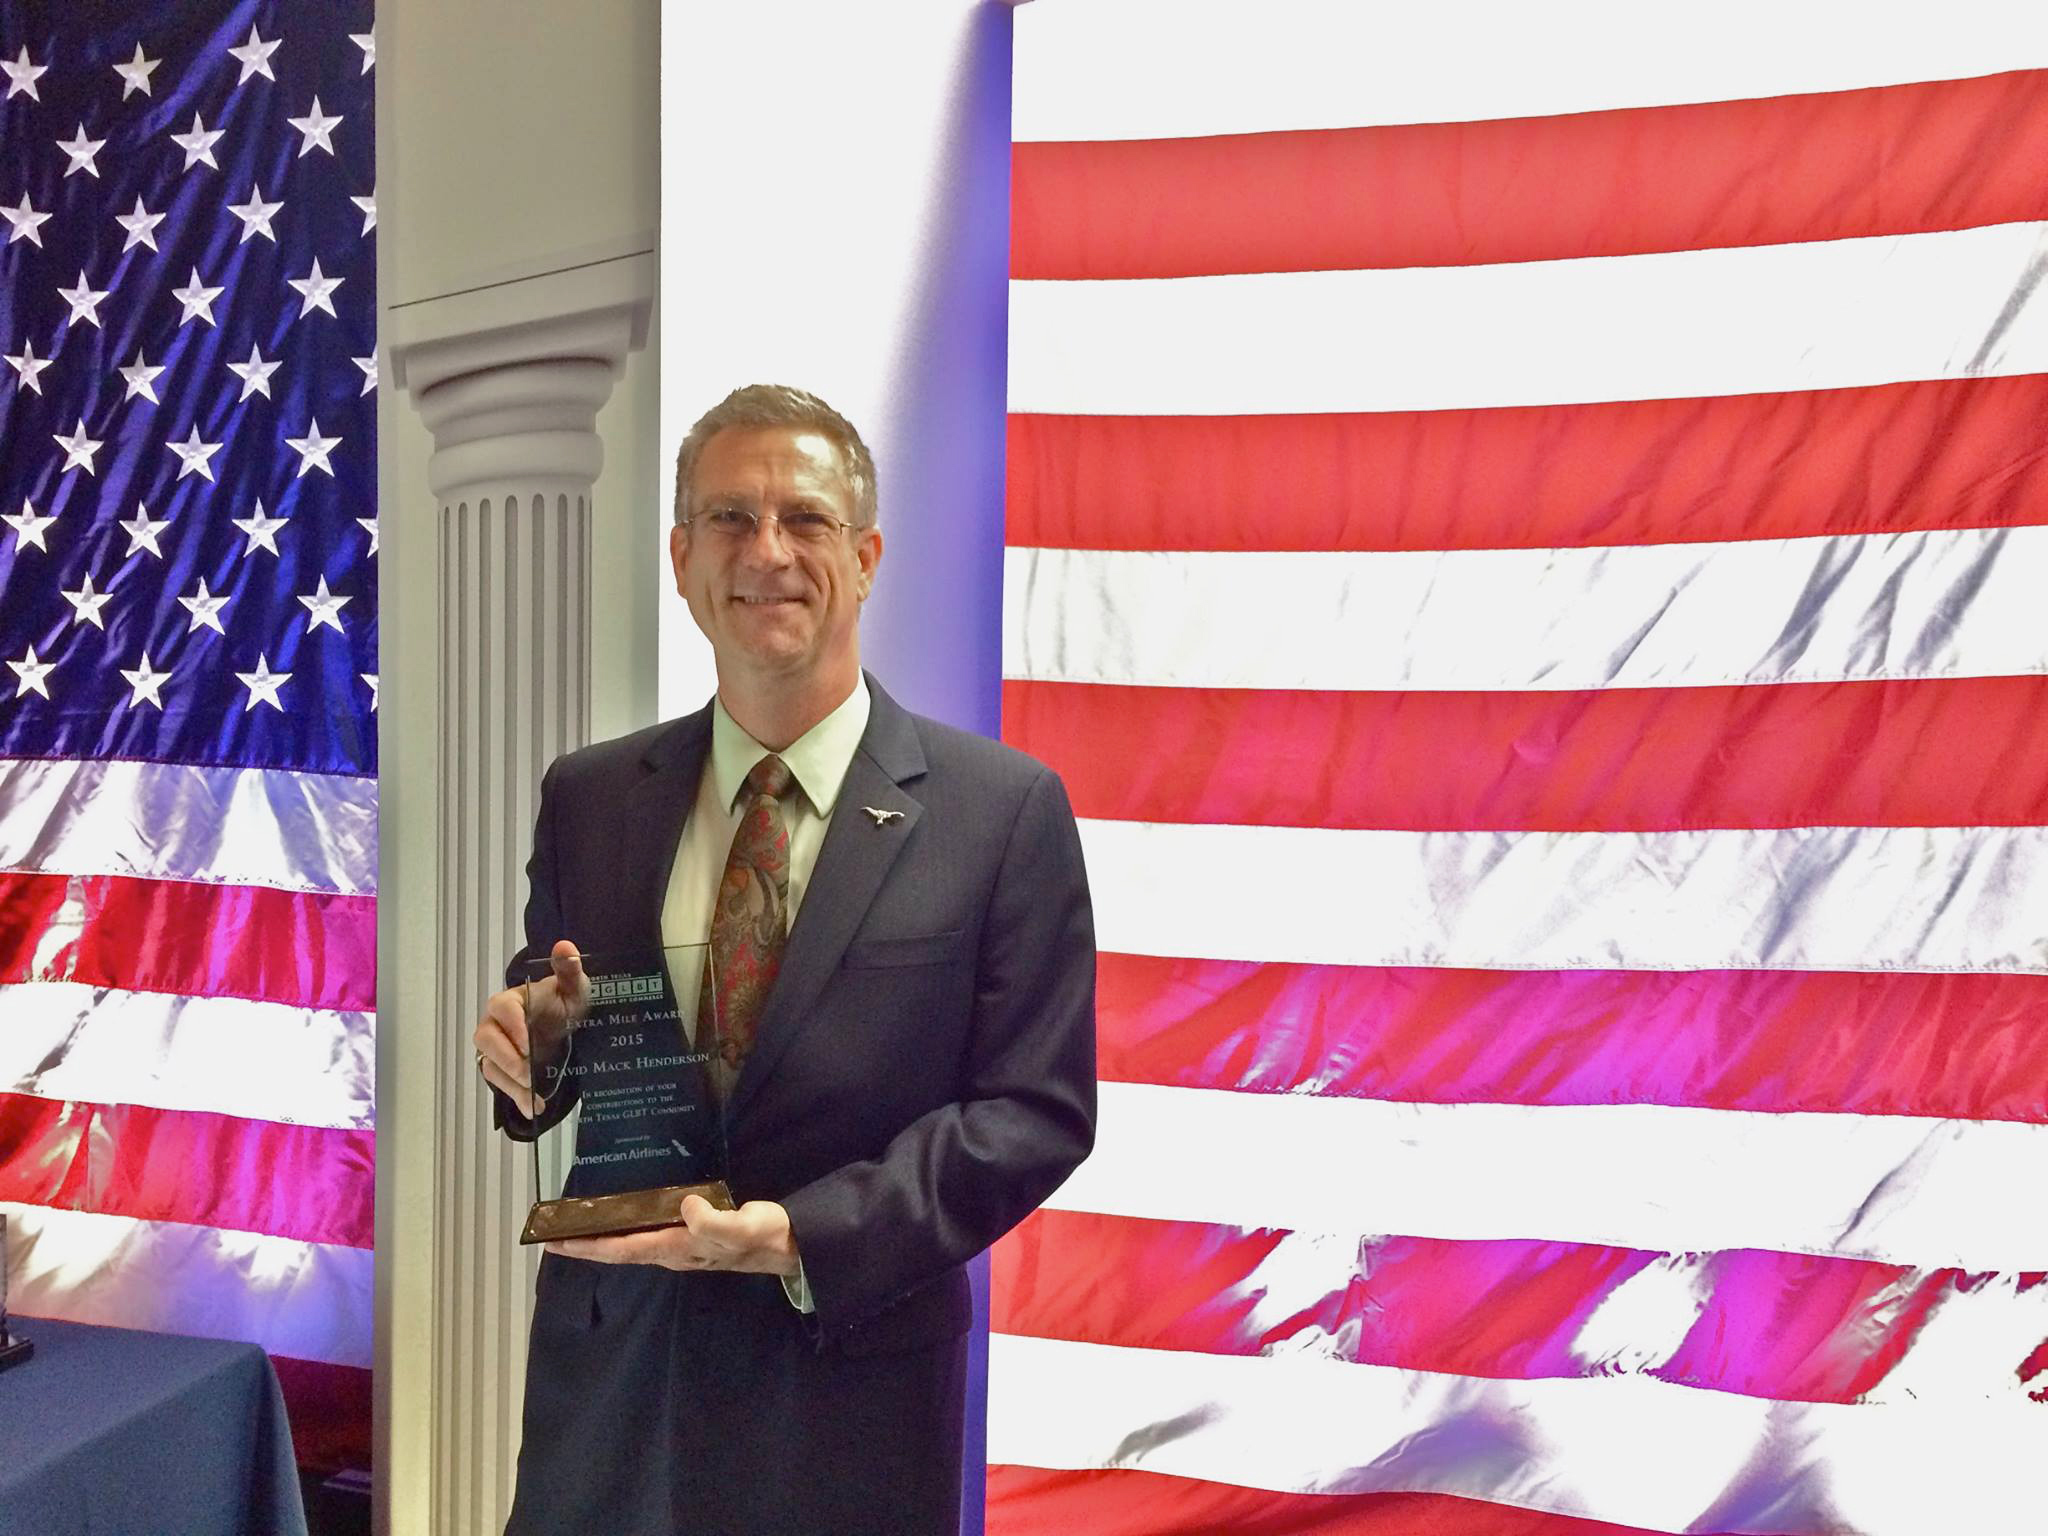 Man holding a glass award in front of an American flag.